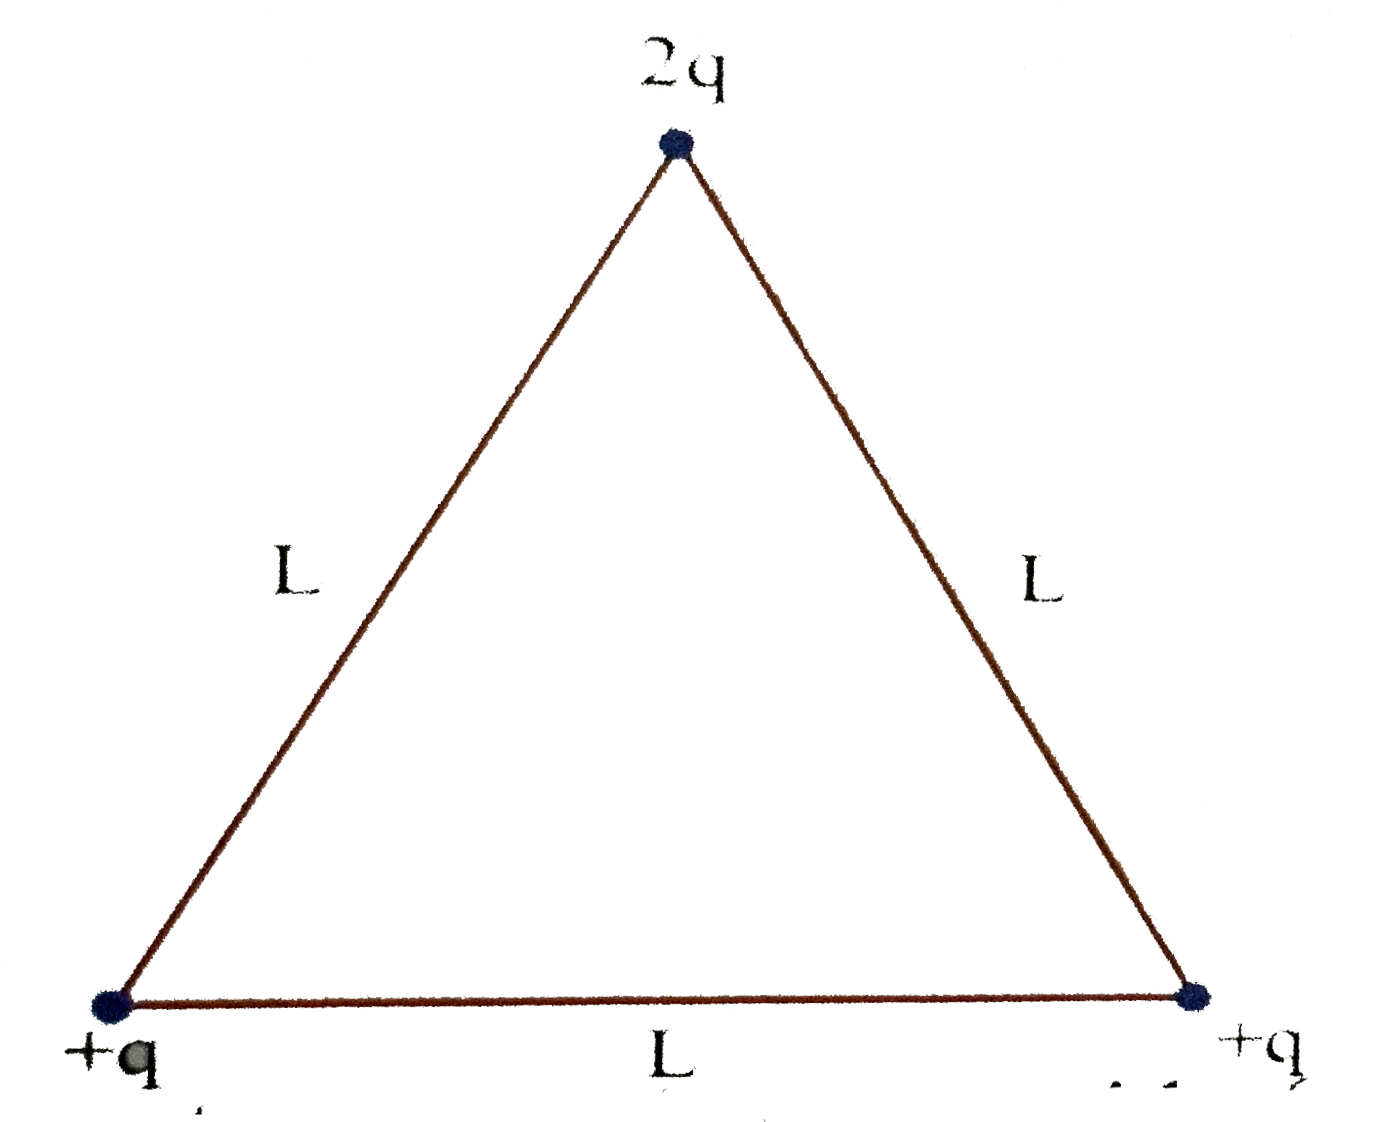 three points charges are placed at the cornors of an equilibrium triangle of side L as shown in the figure